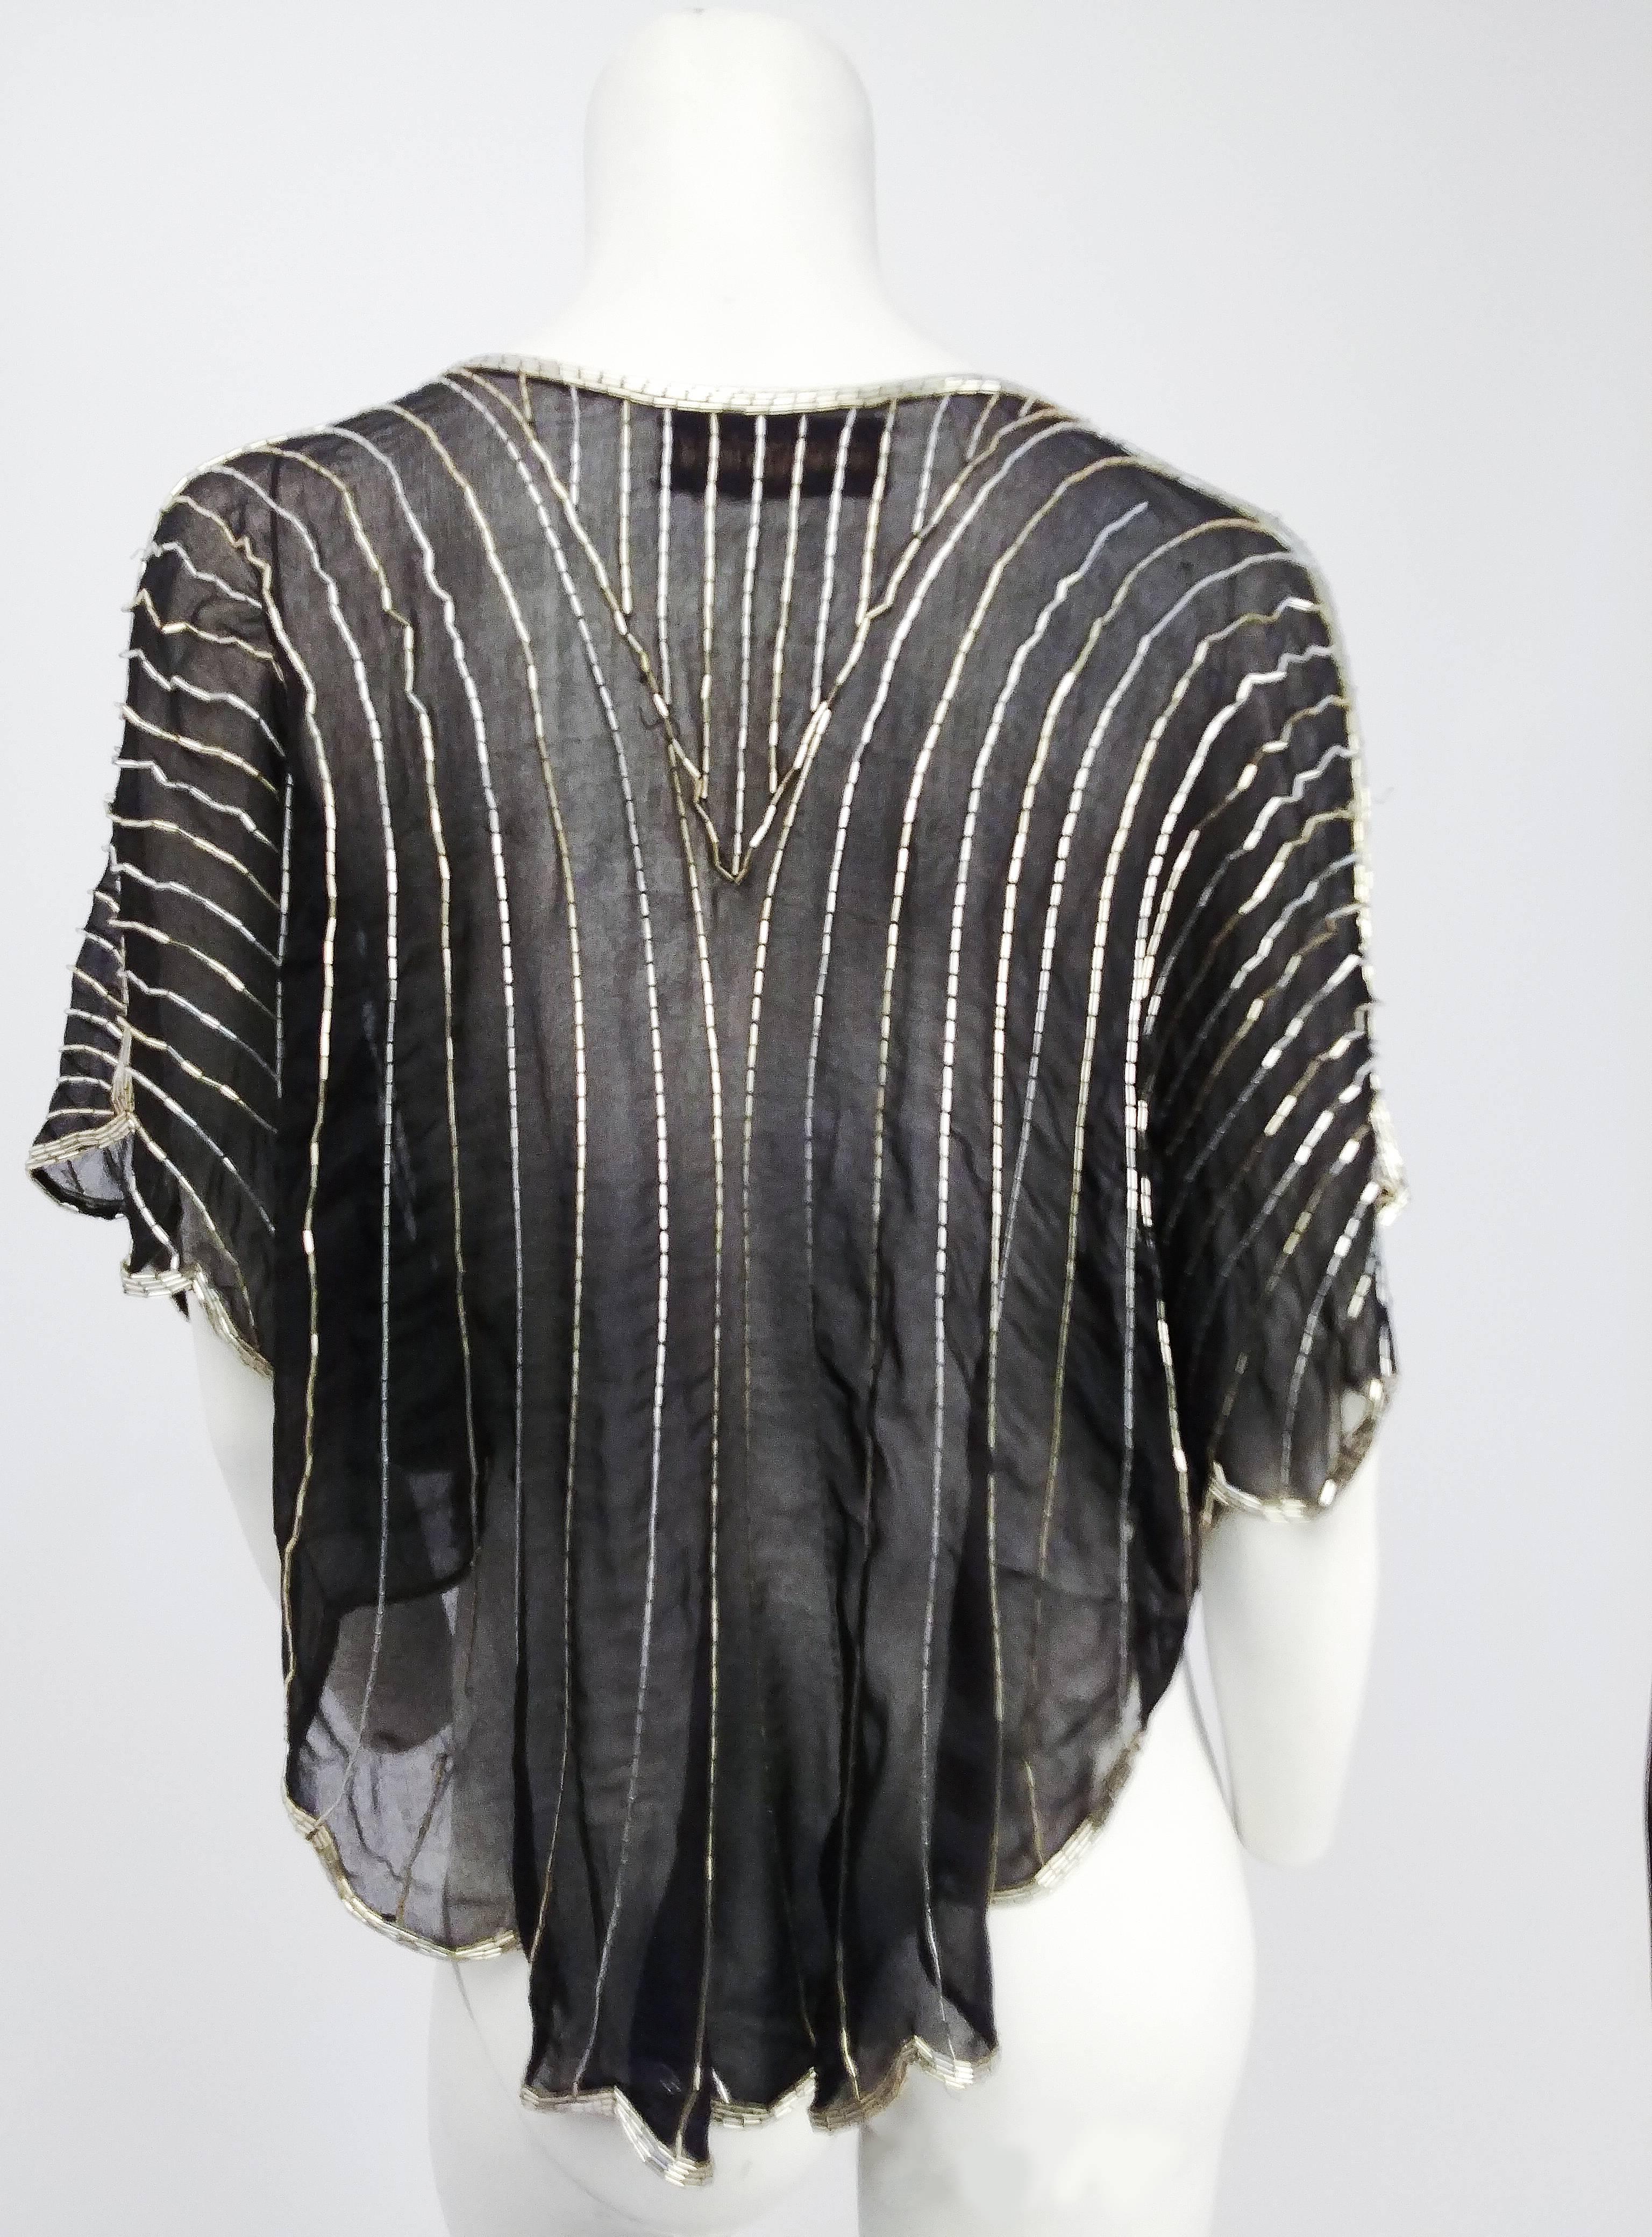 1980s Judith Ann Black & Silver Beaded Silk Chiffon Batwing Top. Silver beads on black chiffon. Scalloped hem, also trimmed with silver beading. Loose fit.